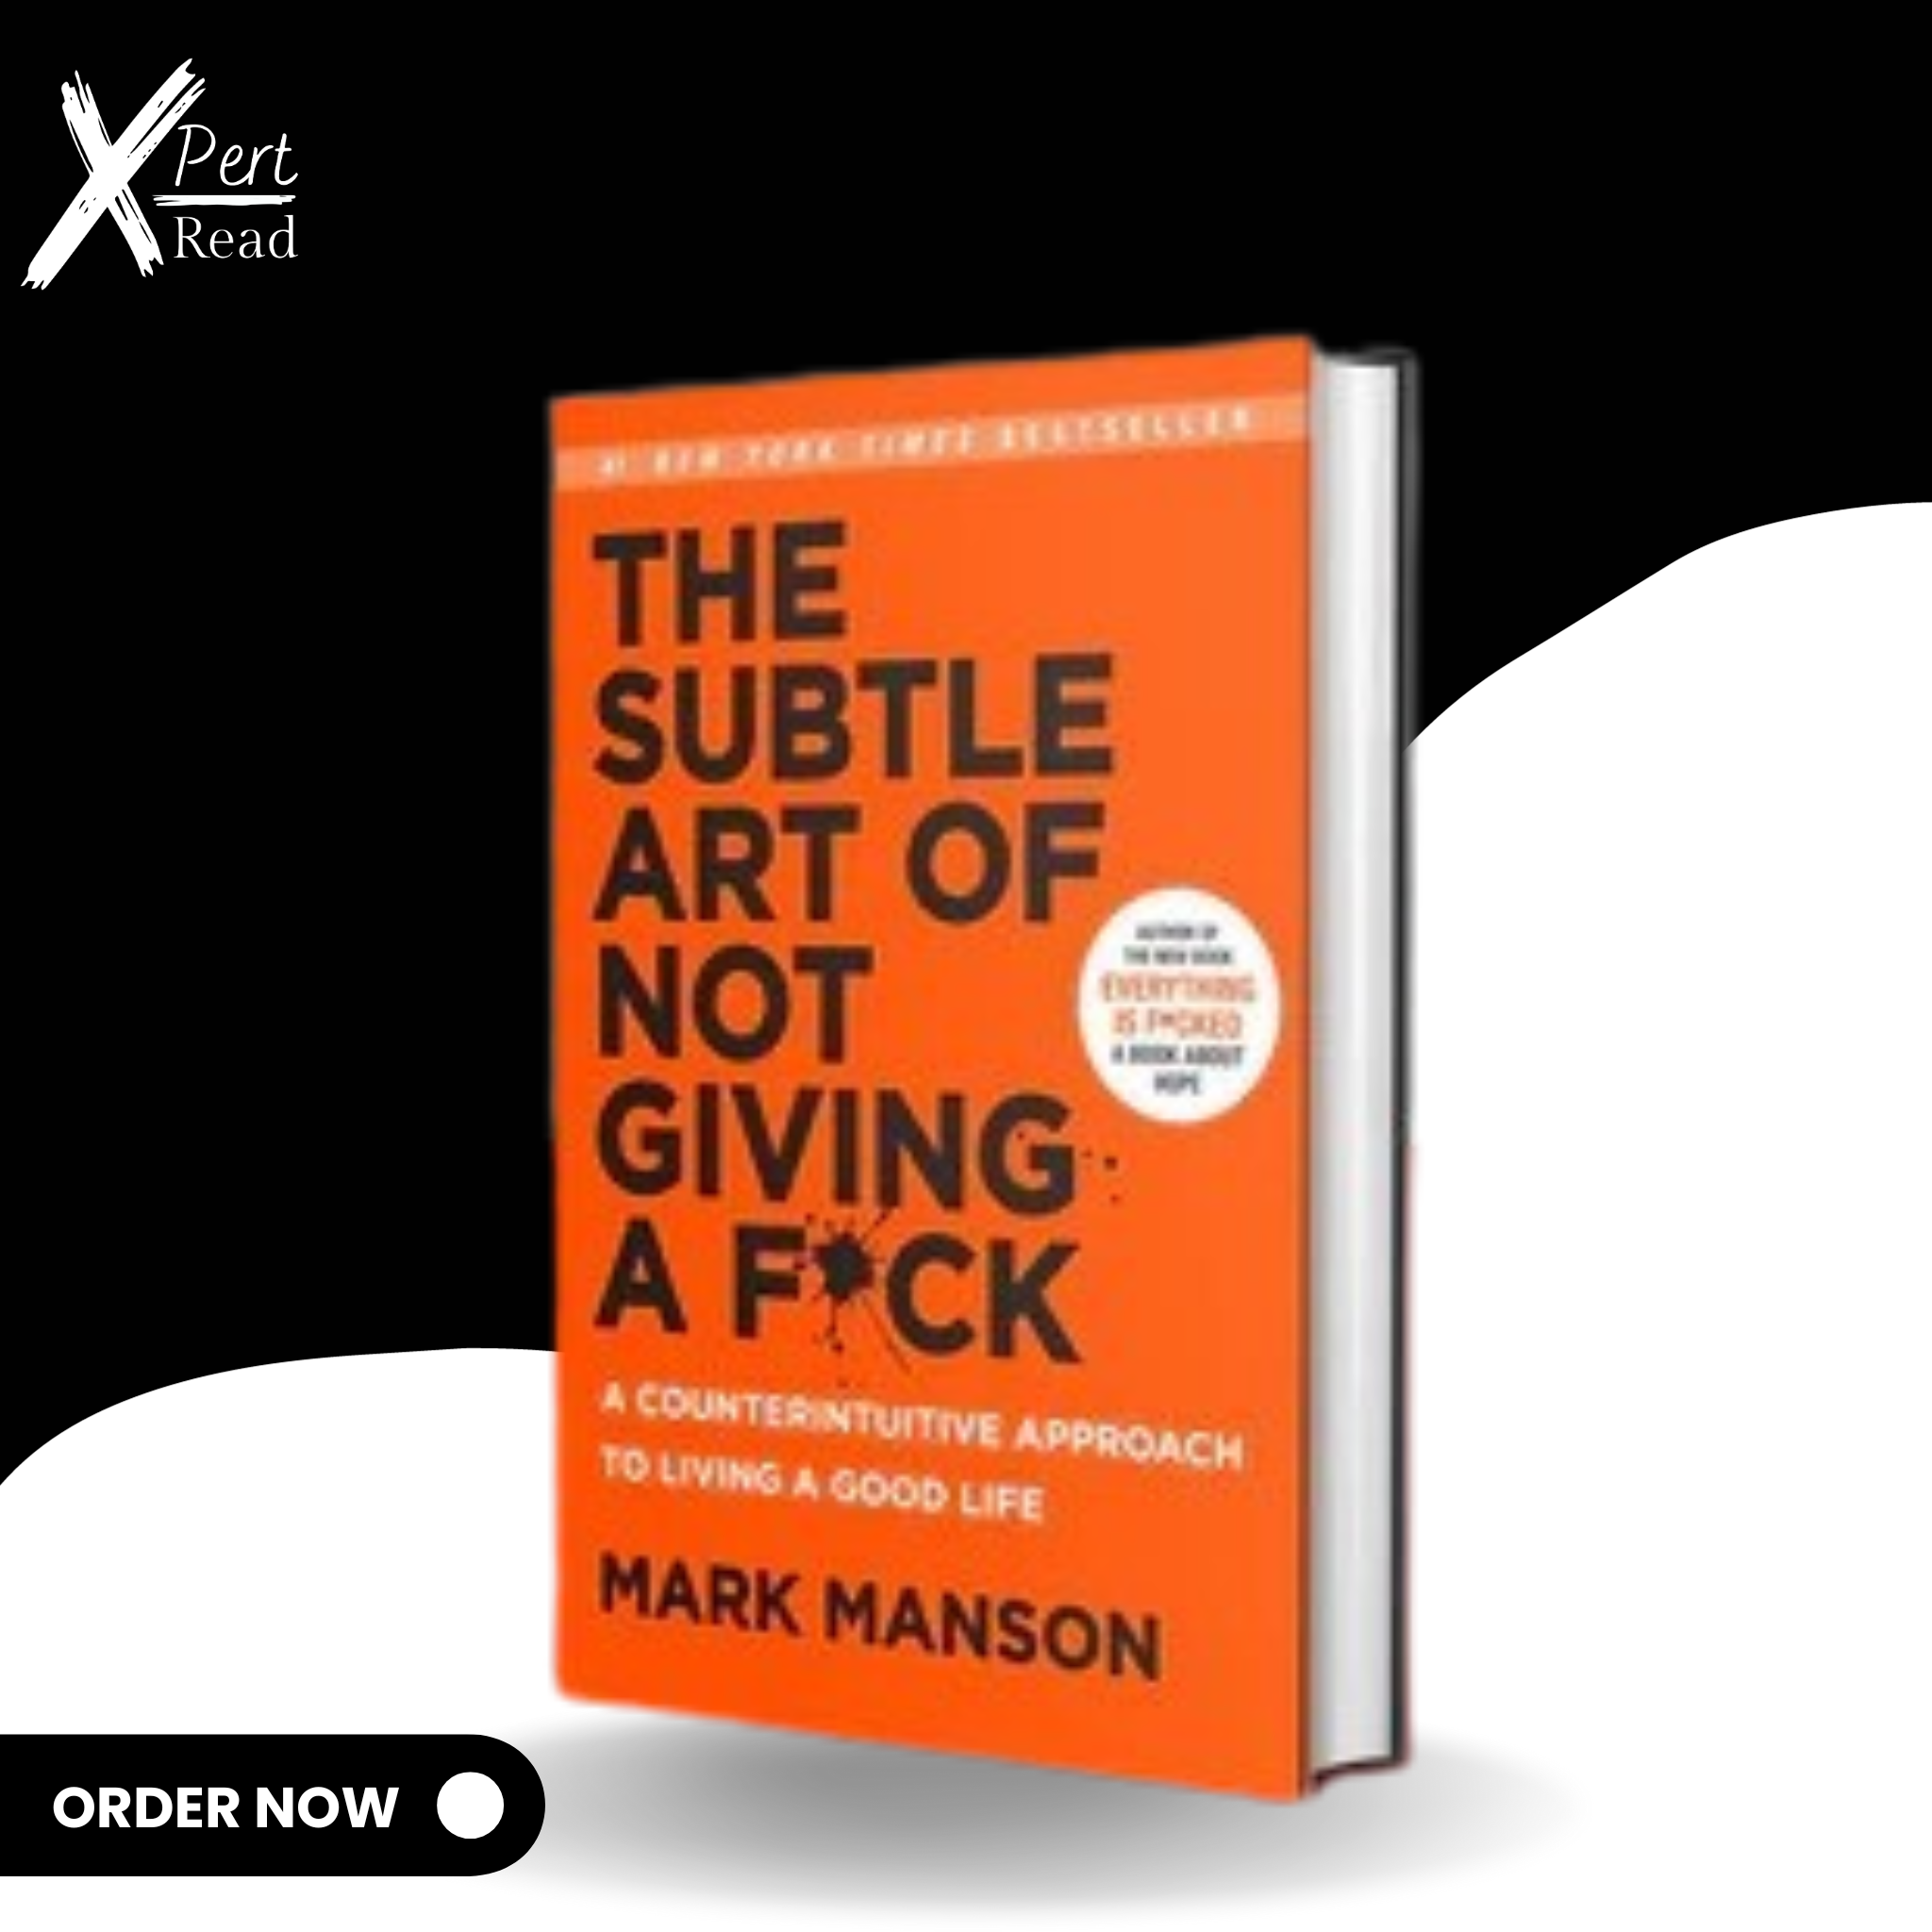 The Subtle Art Of Not Giving A F*ck By Mark Manson (Original Hardcover Book)